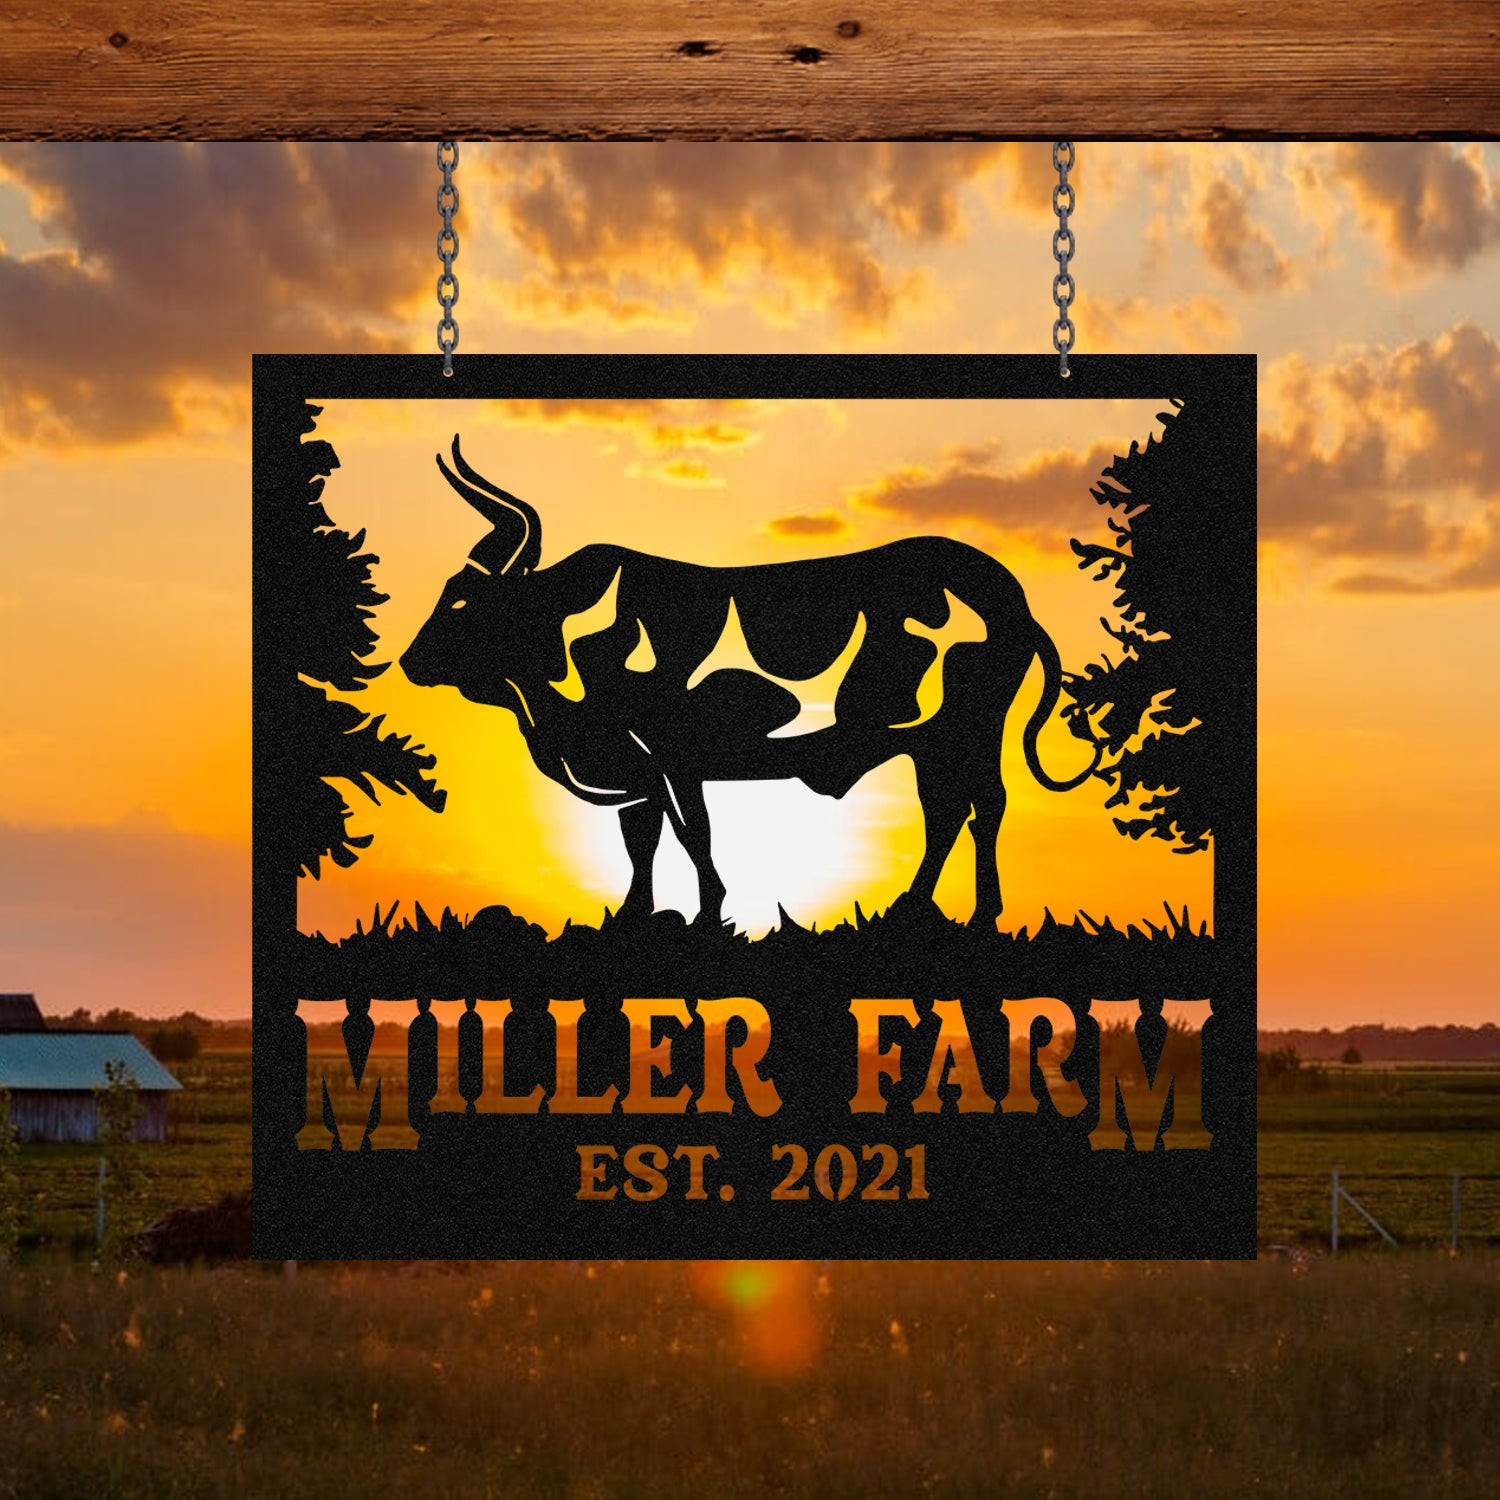 Personalized Metal Farm Sign Bull, Custom Outdoor Farmhouse, Ranch, Stable, Wall Decor Art Gift, Metal Laser Cut Metal Signs Custom Gift Ideas 14x14IN